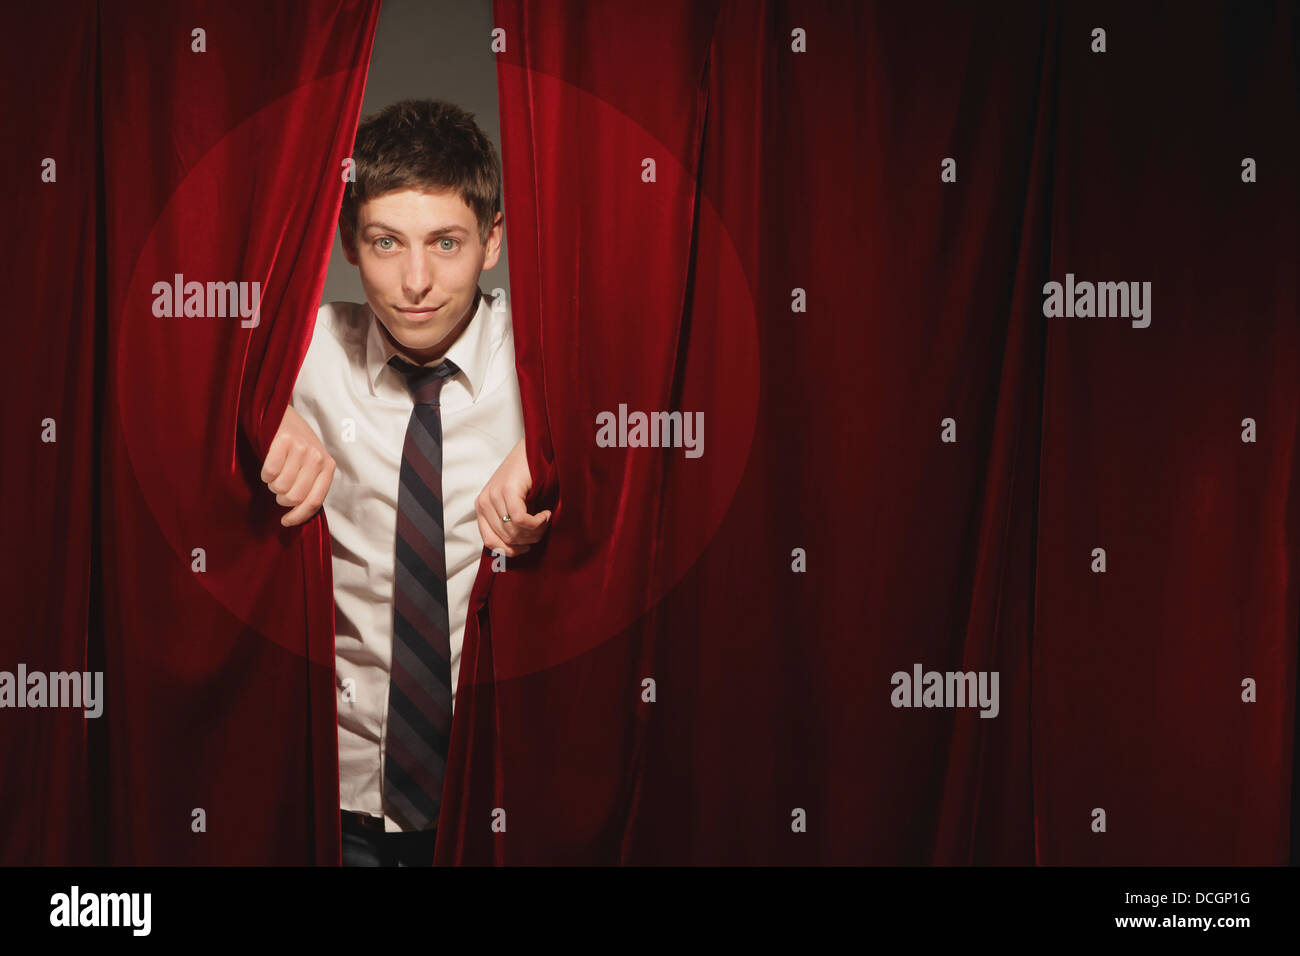 Man Peeking From Behind Red Stage Curtain Stock Photo